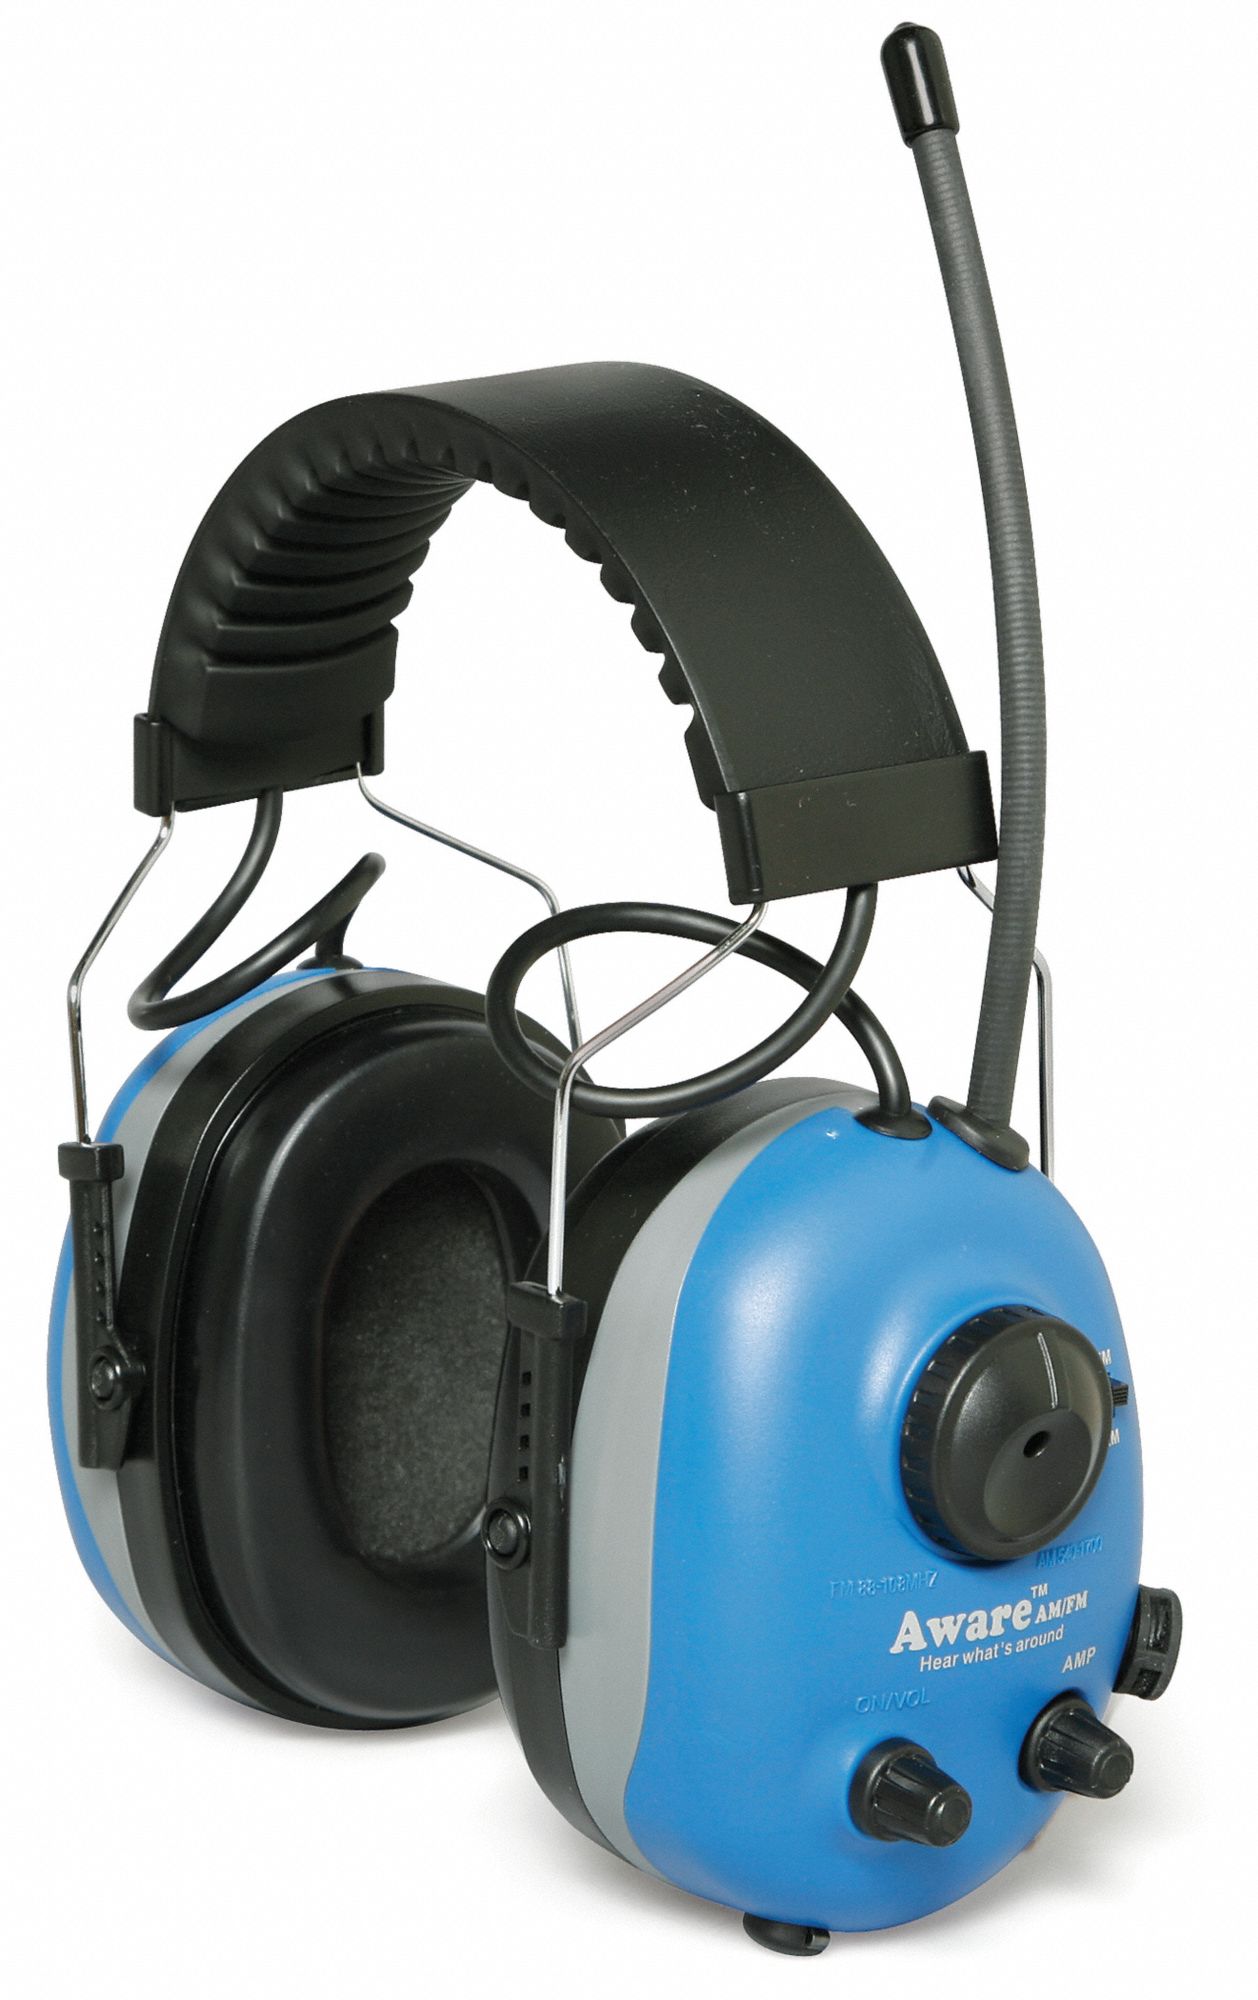 9YD14 - Electronic Ear Muff 22dB Over-the-Head